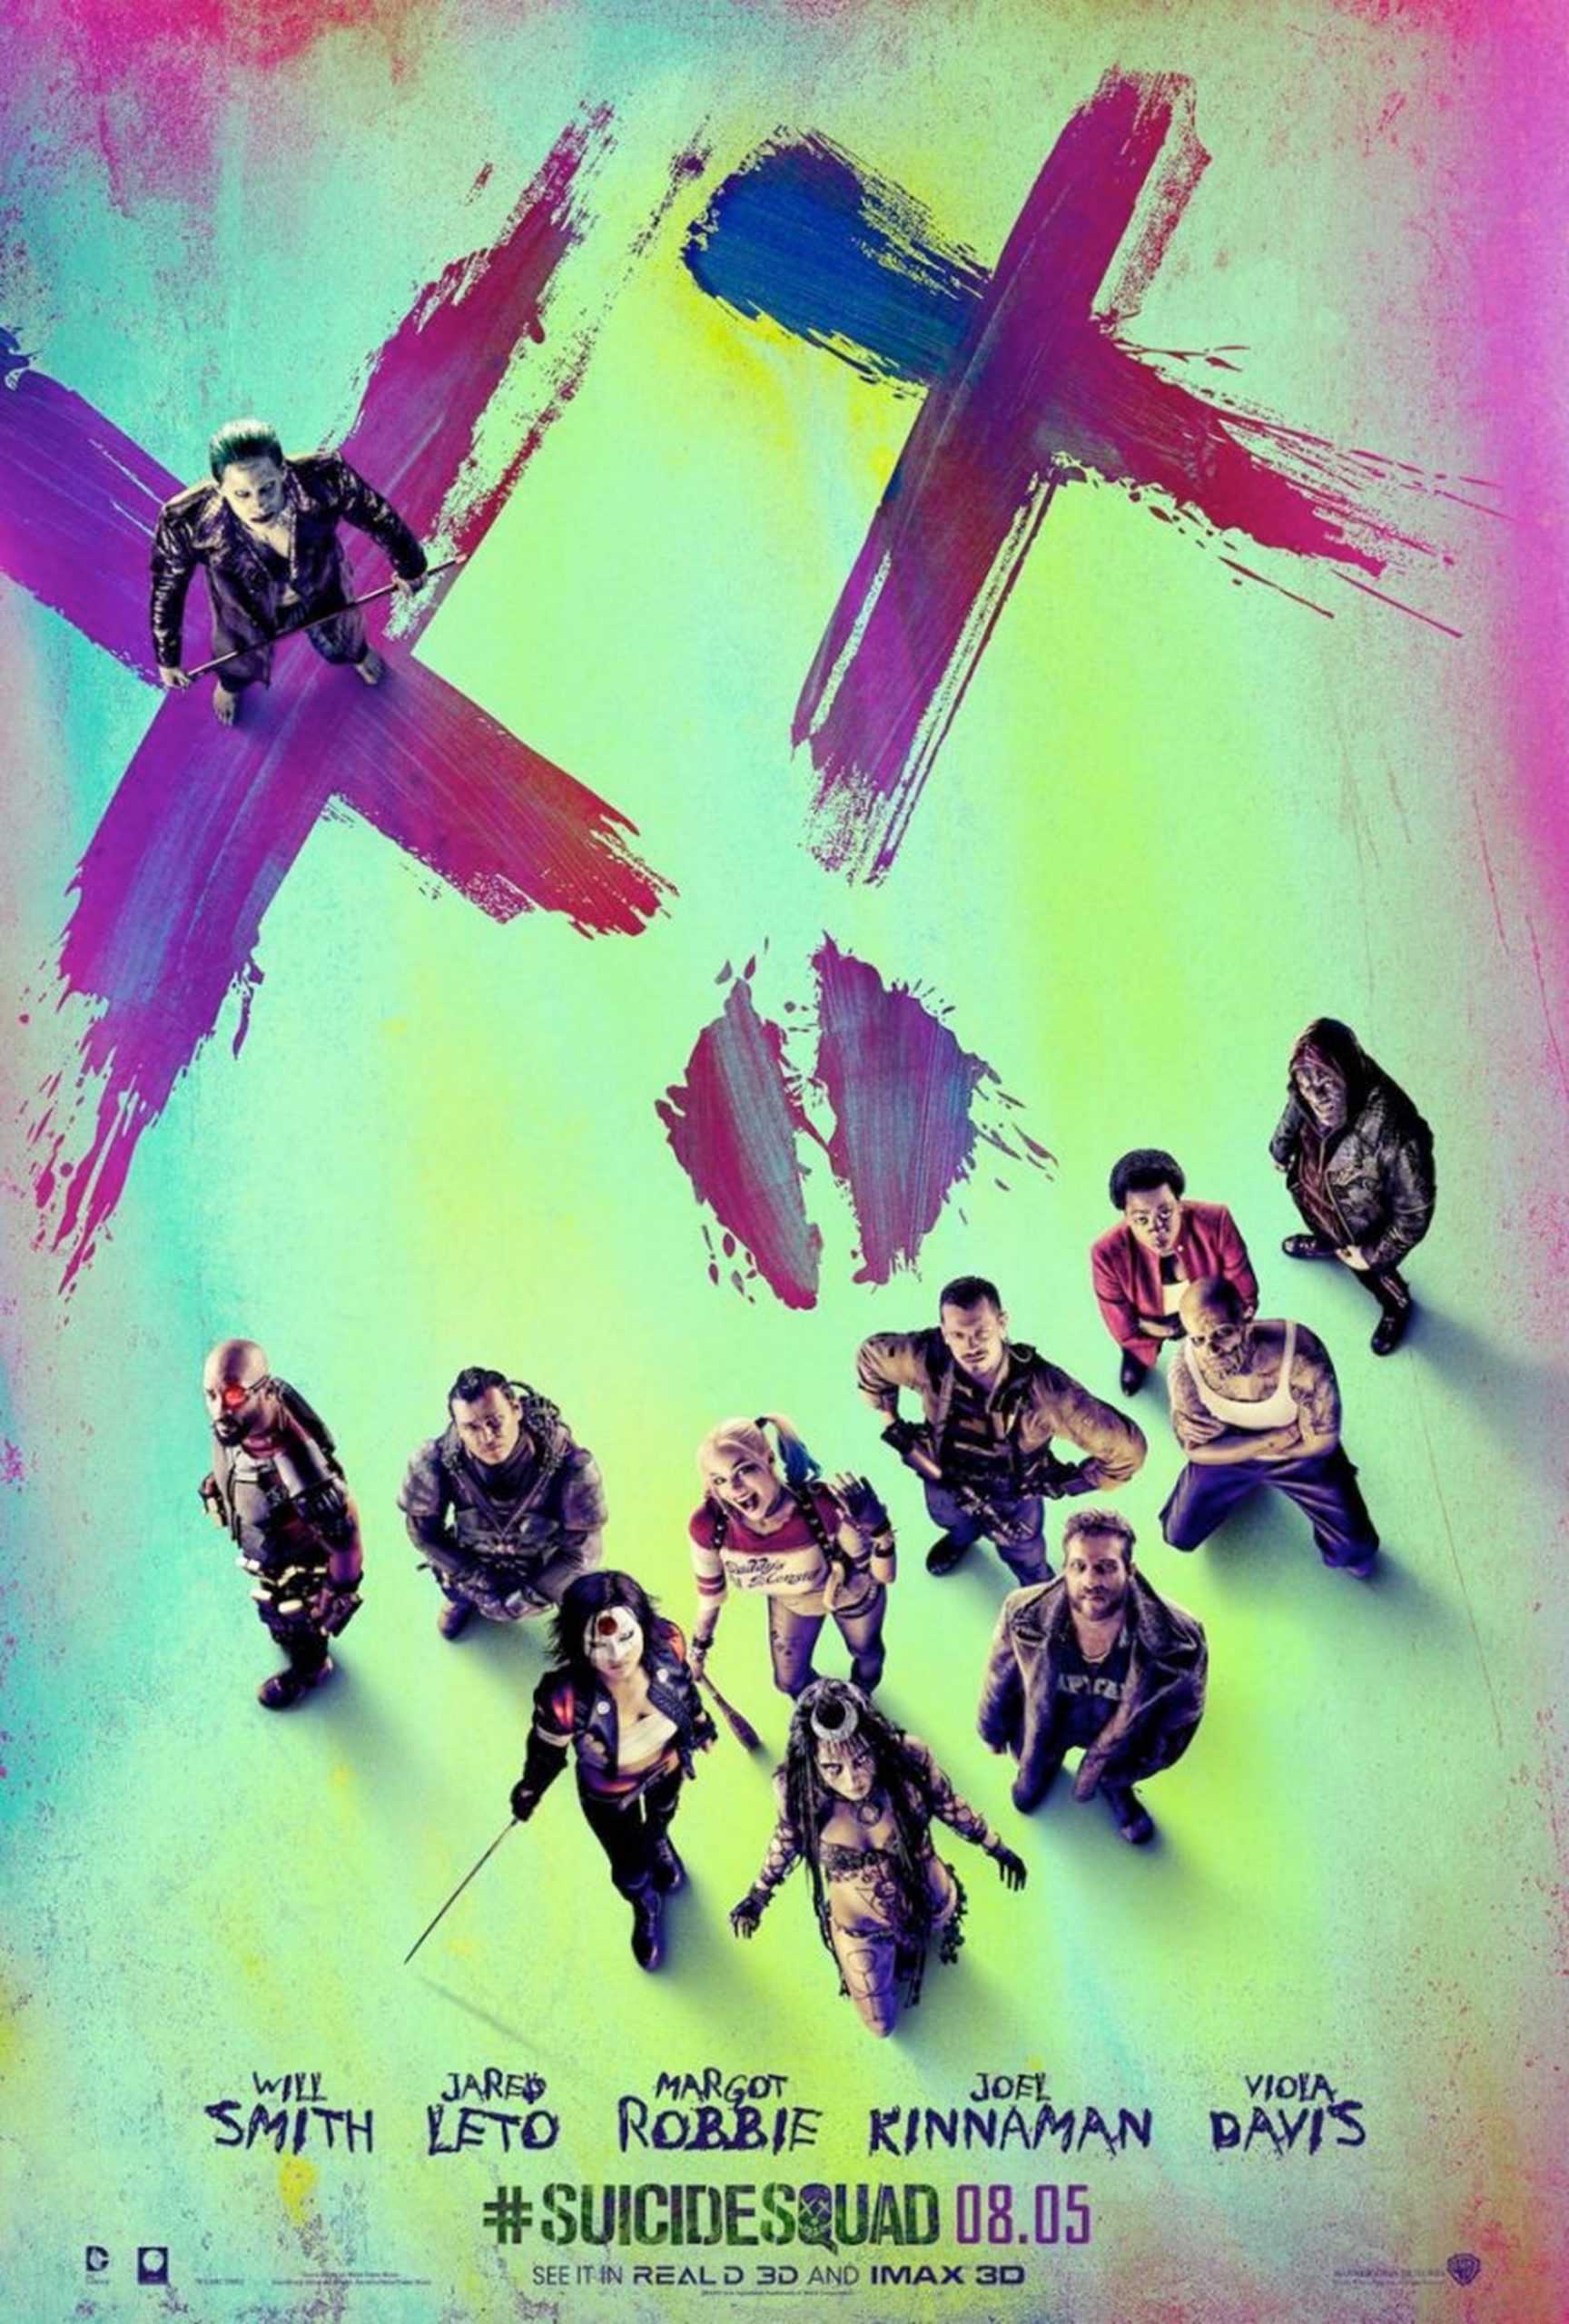 “Suicide Squad” doesn’t live up to the hype